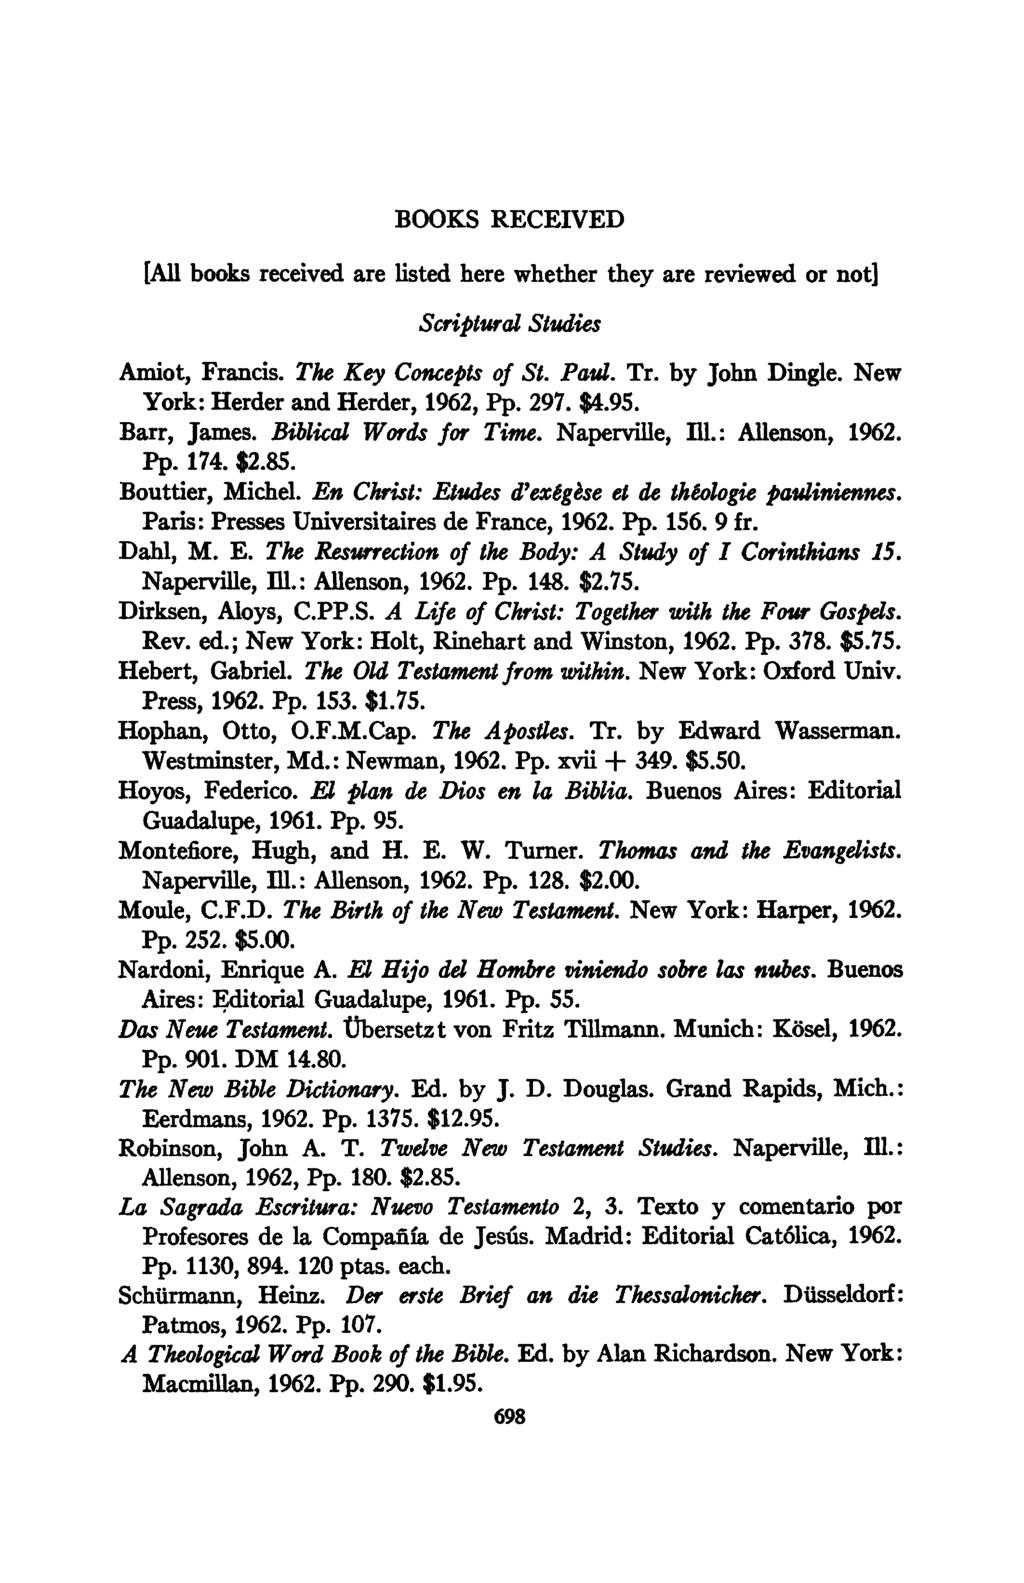 BOOKS RECEIVED [All books received are listed here whether they are reviewed or not] Scriptural Studies Amiot, Francis. The Key Concepts of St. Paul. Tr. by John Dingle.